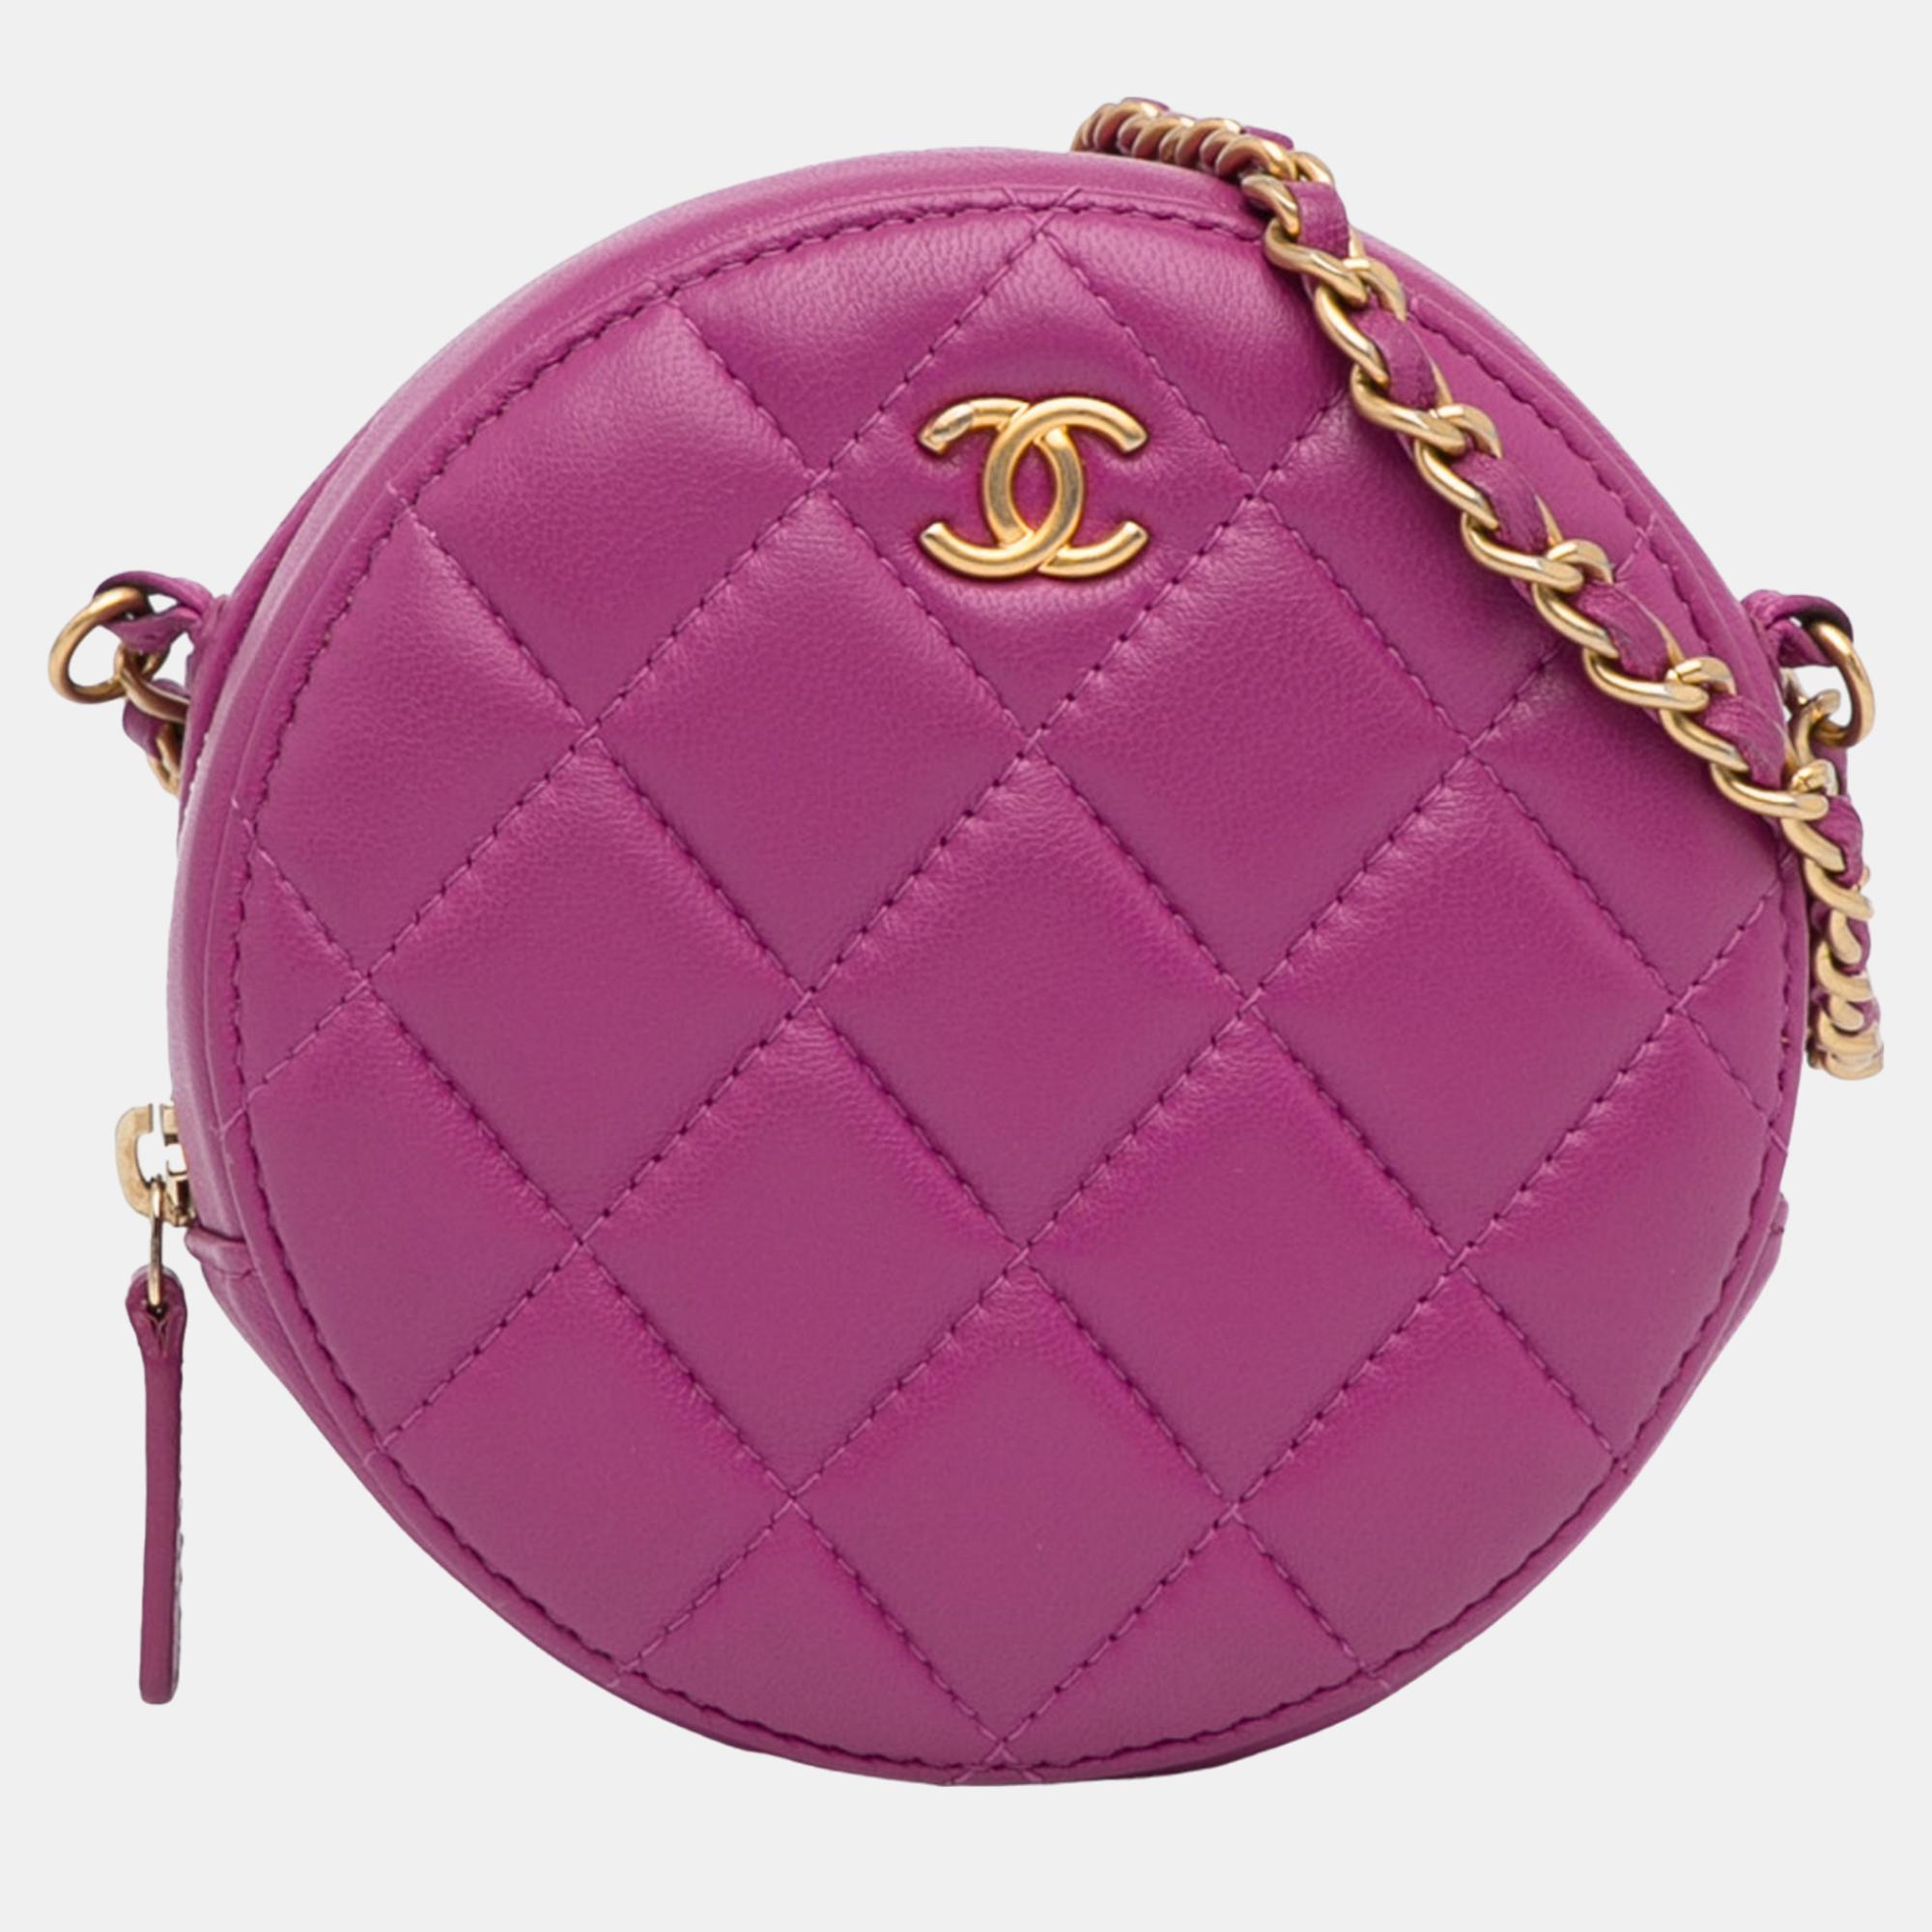 Chanel purple lambskin pearl crush round clutch with chain